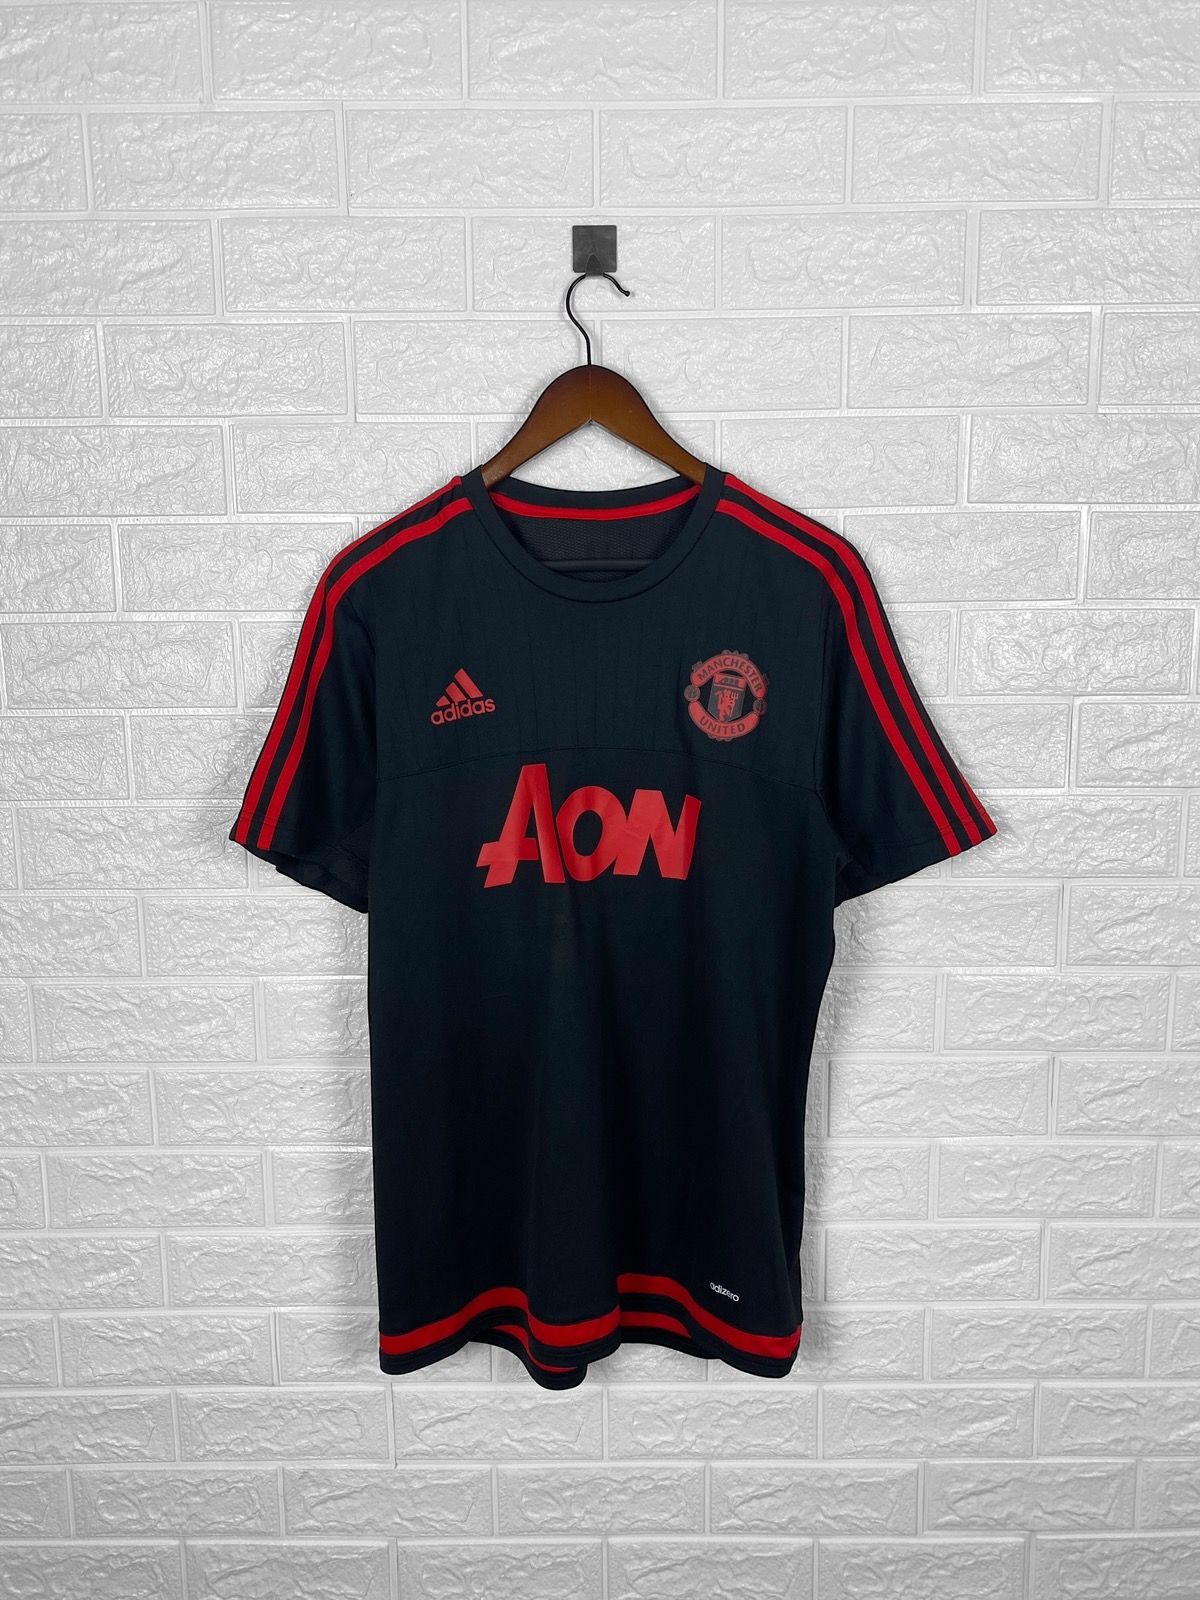 Pre-owned Adidas X Jersey Adidas Manchester United 2015 2016 Football Soccer Jersey In Black